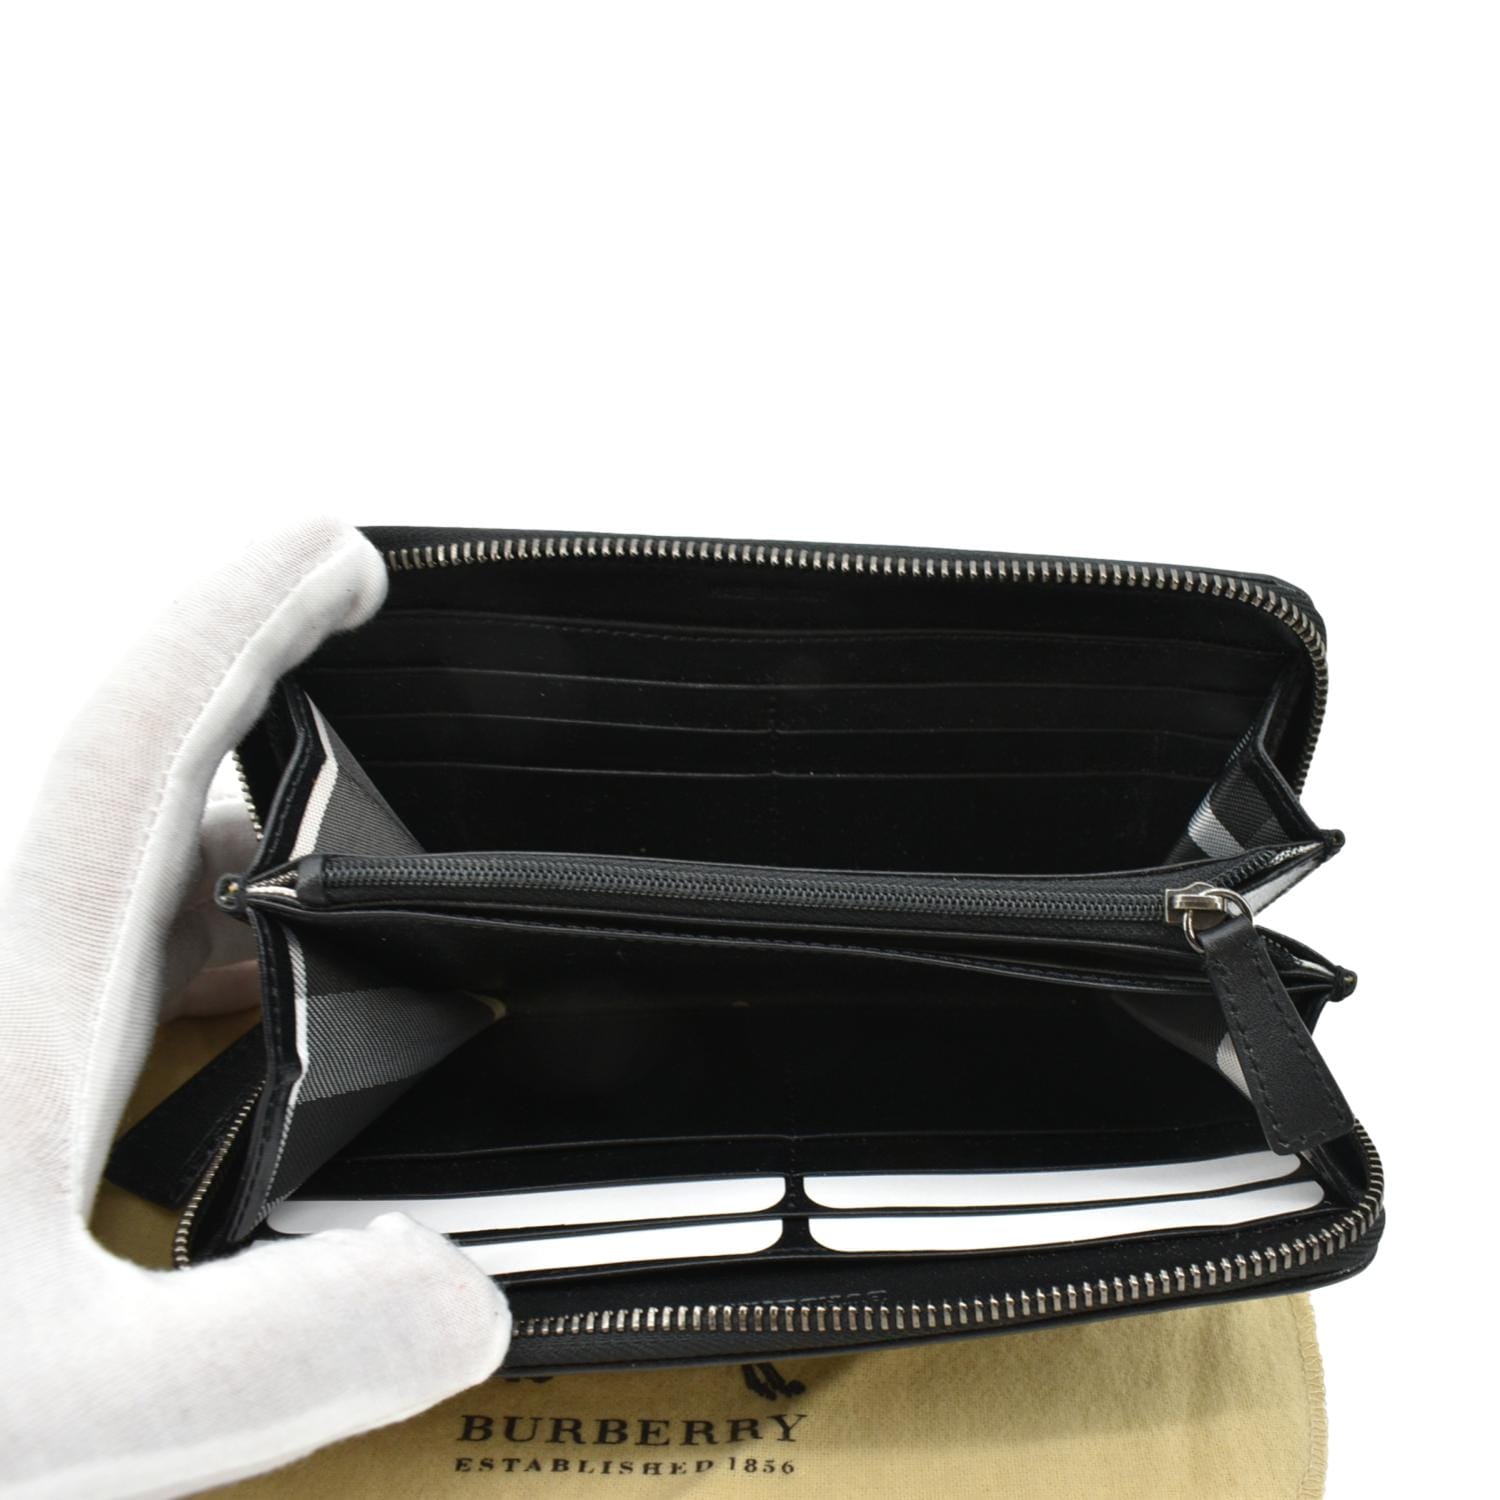 Authentic Burberry black studded wallet